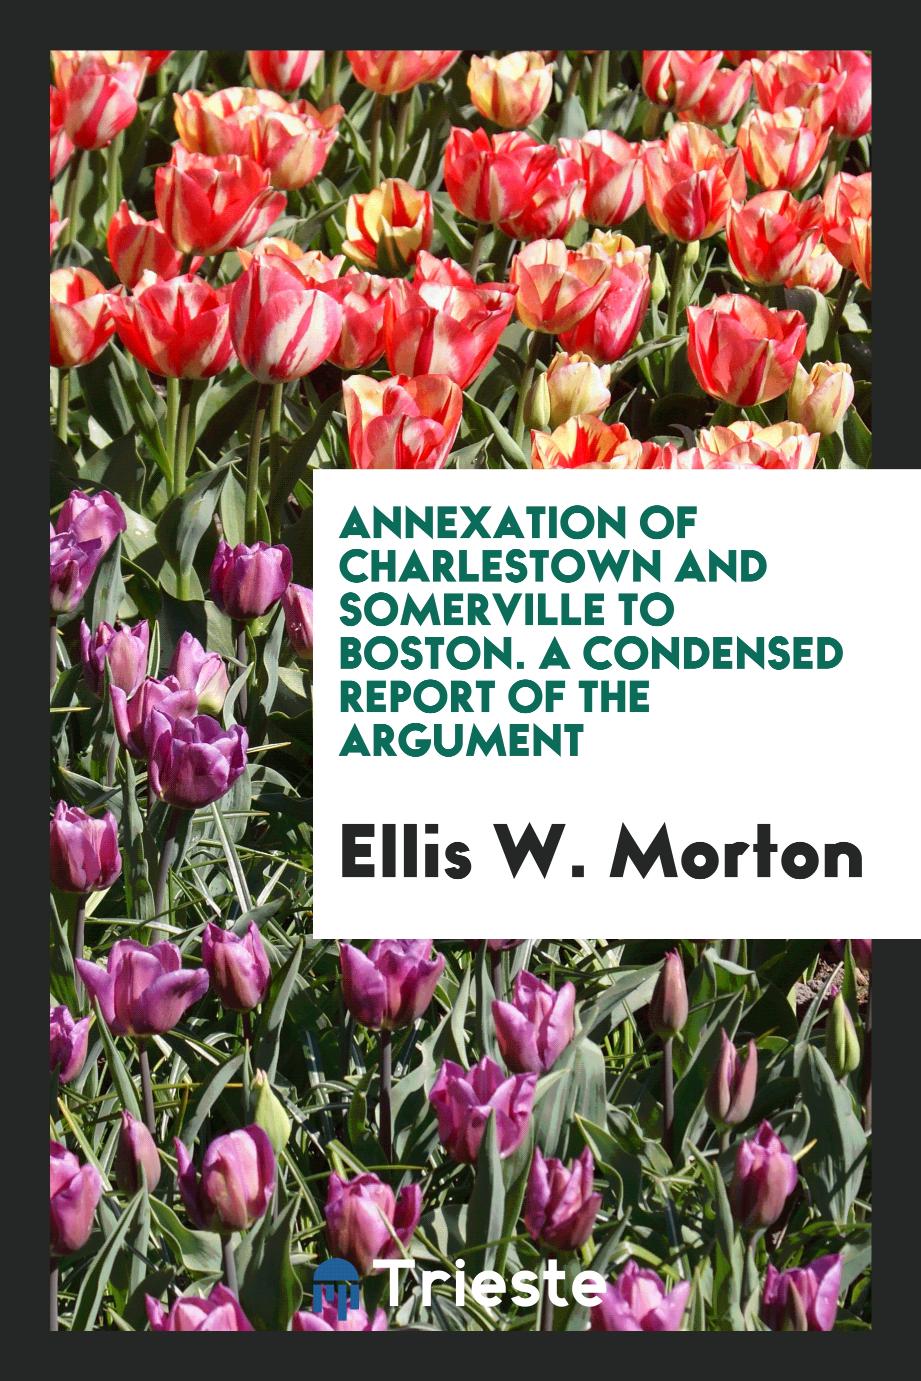 Annexation of Charlestown and Somerville to Boston. A condensed report of the argument